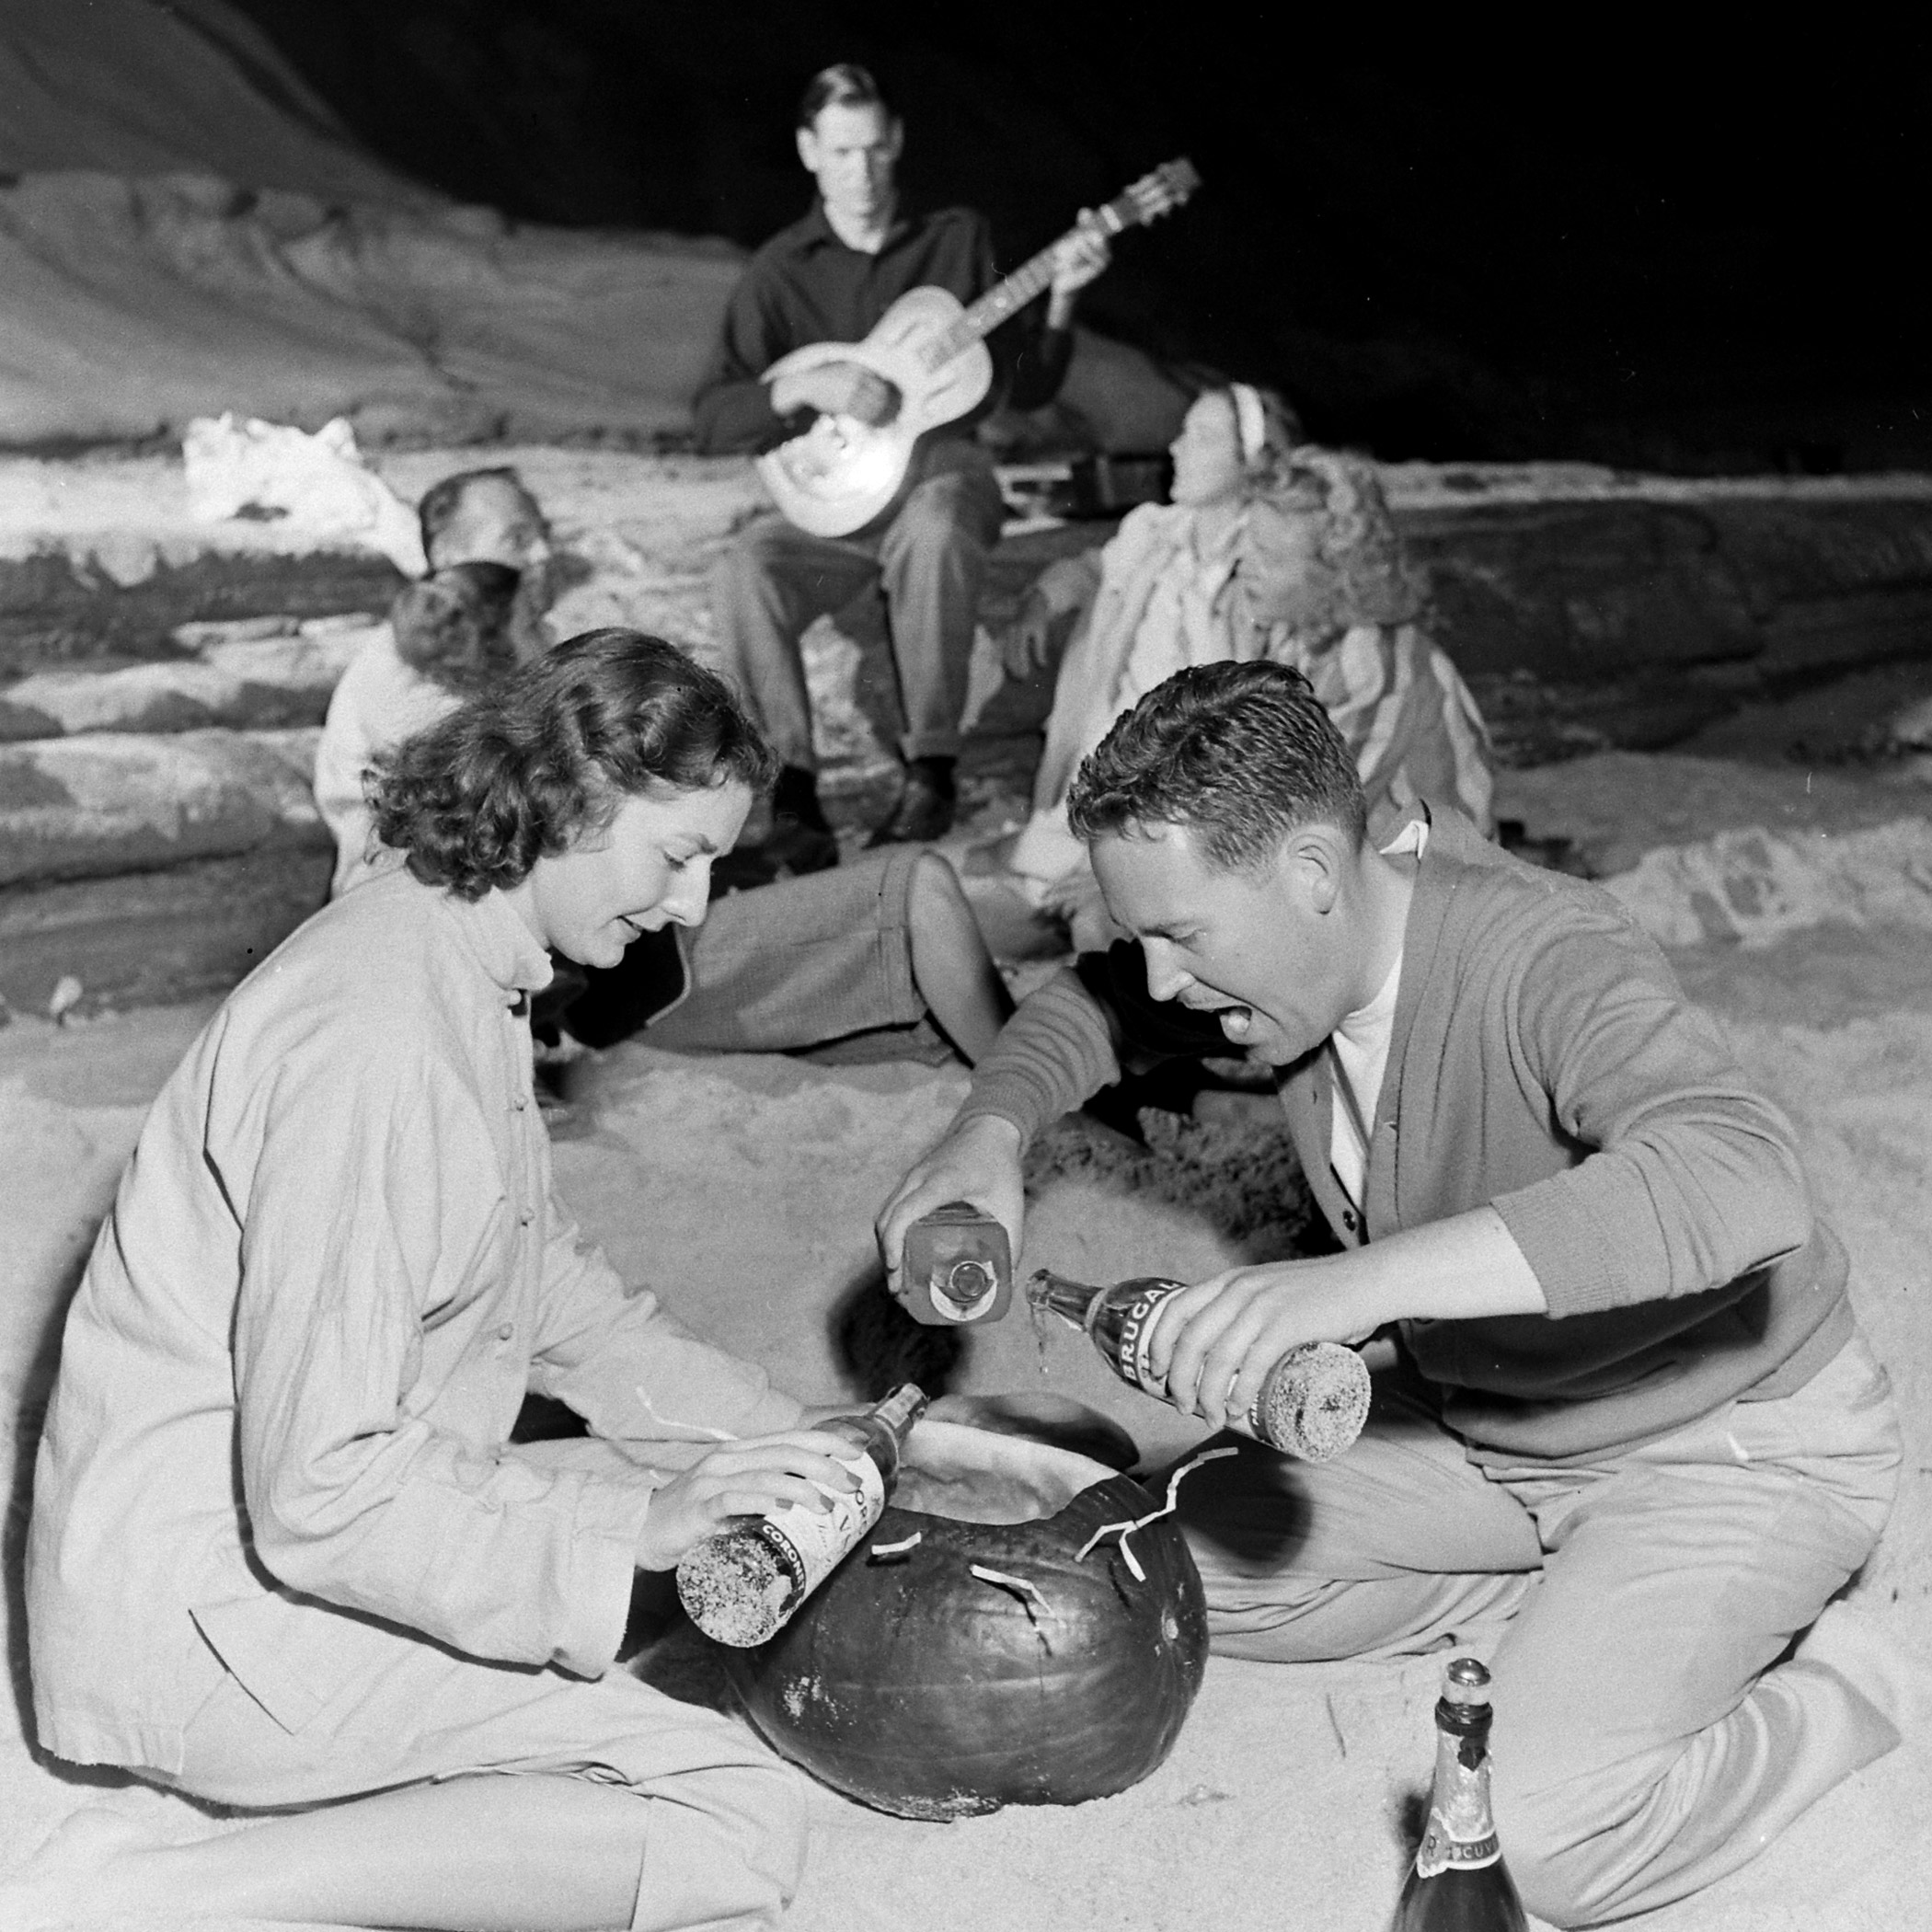 Spiked watermelon beach party in San Diego, 1948.